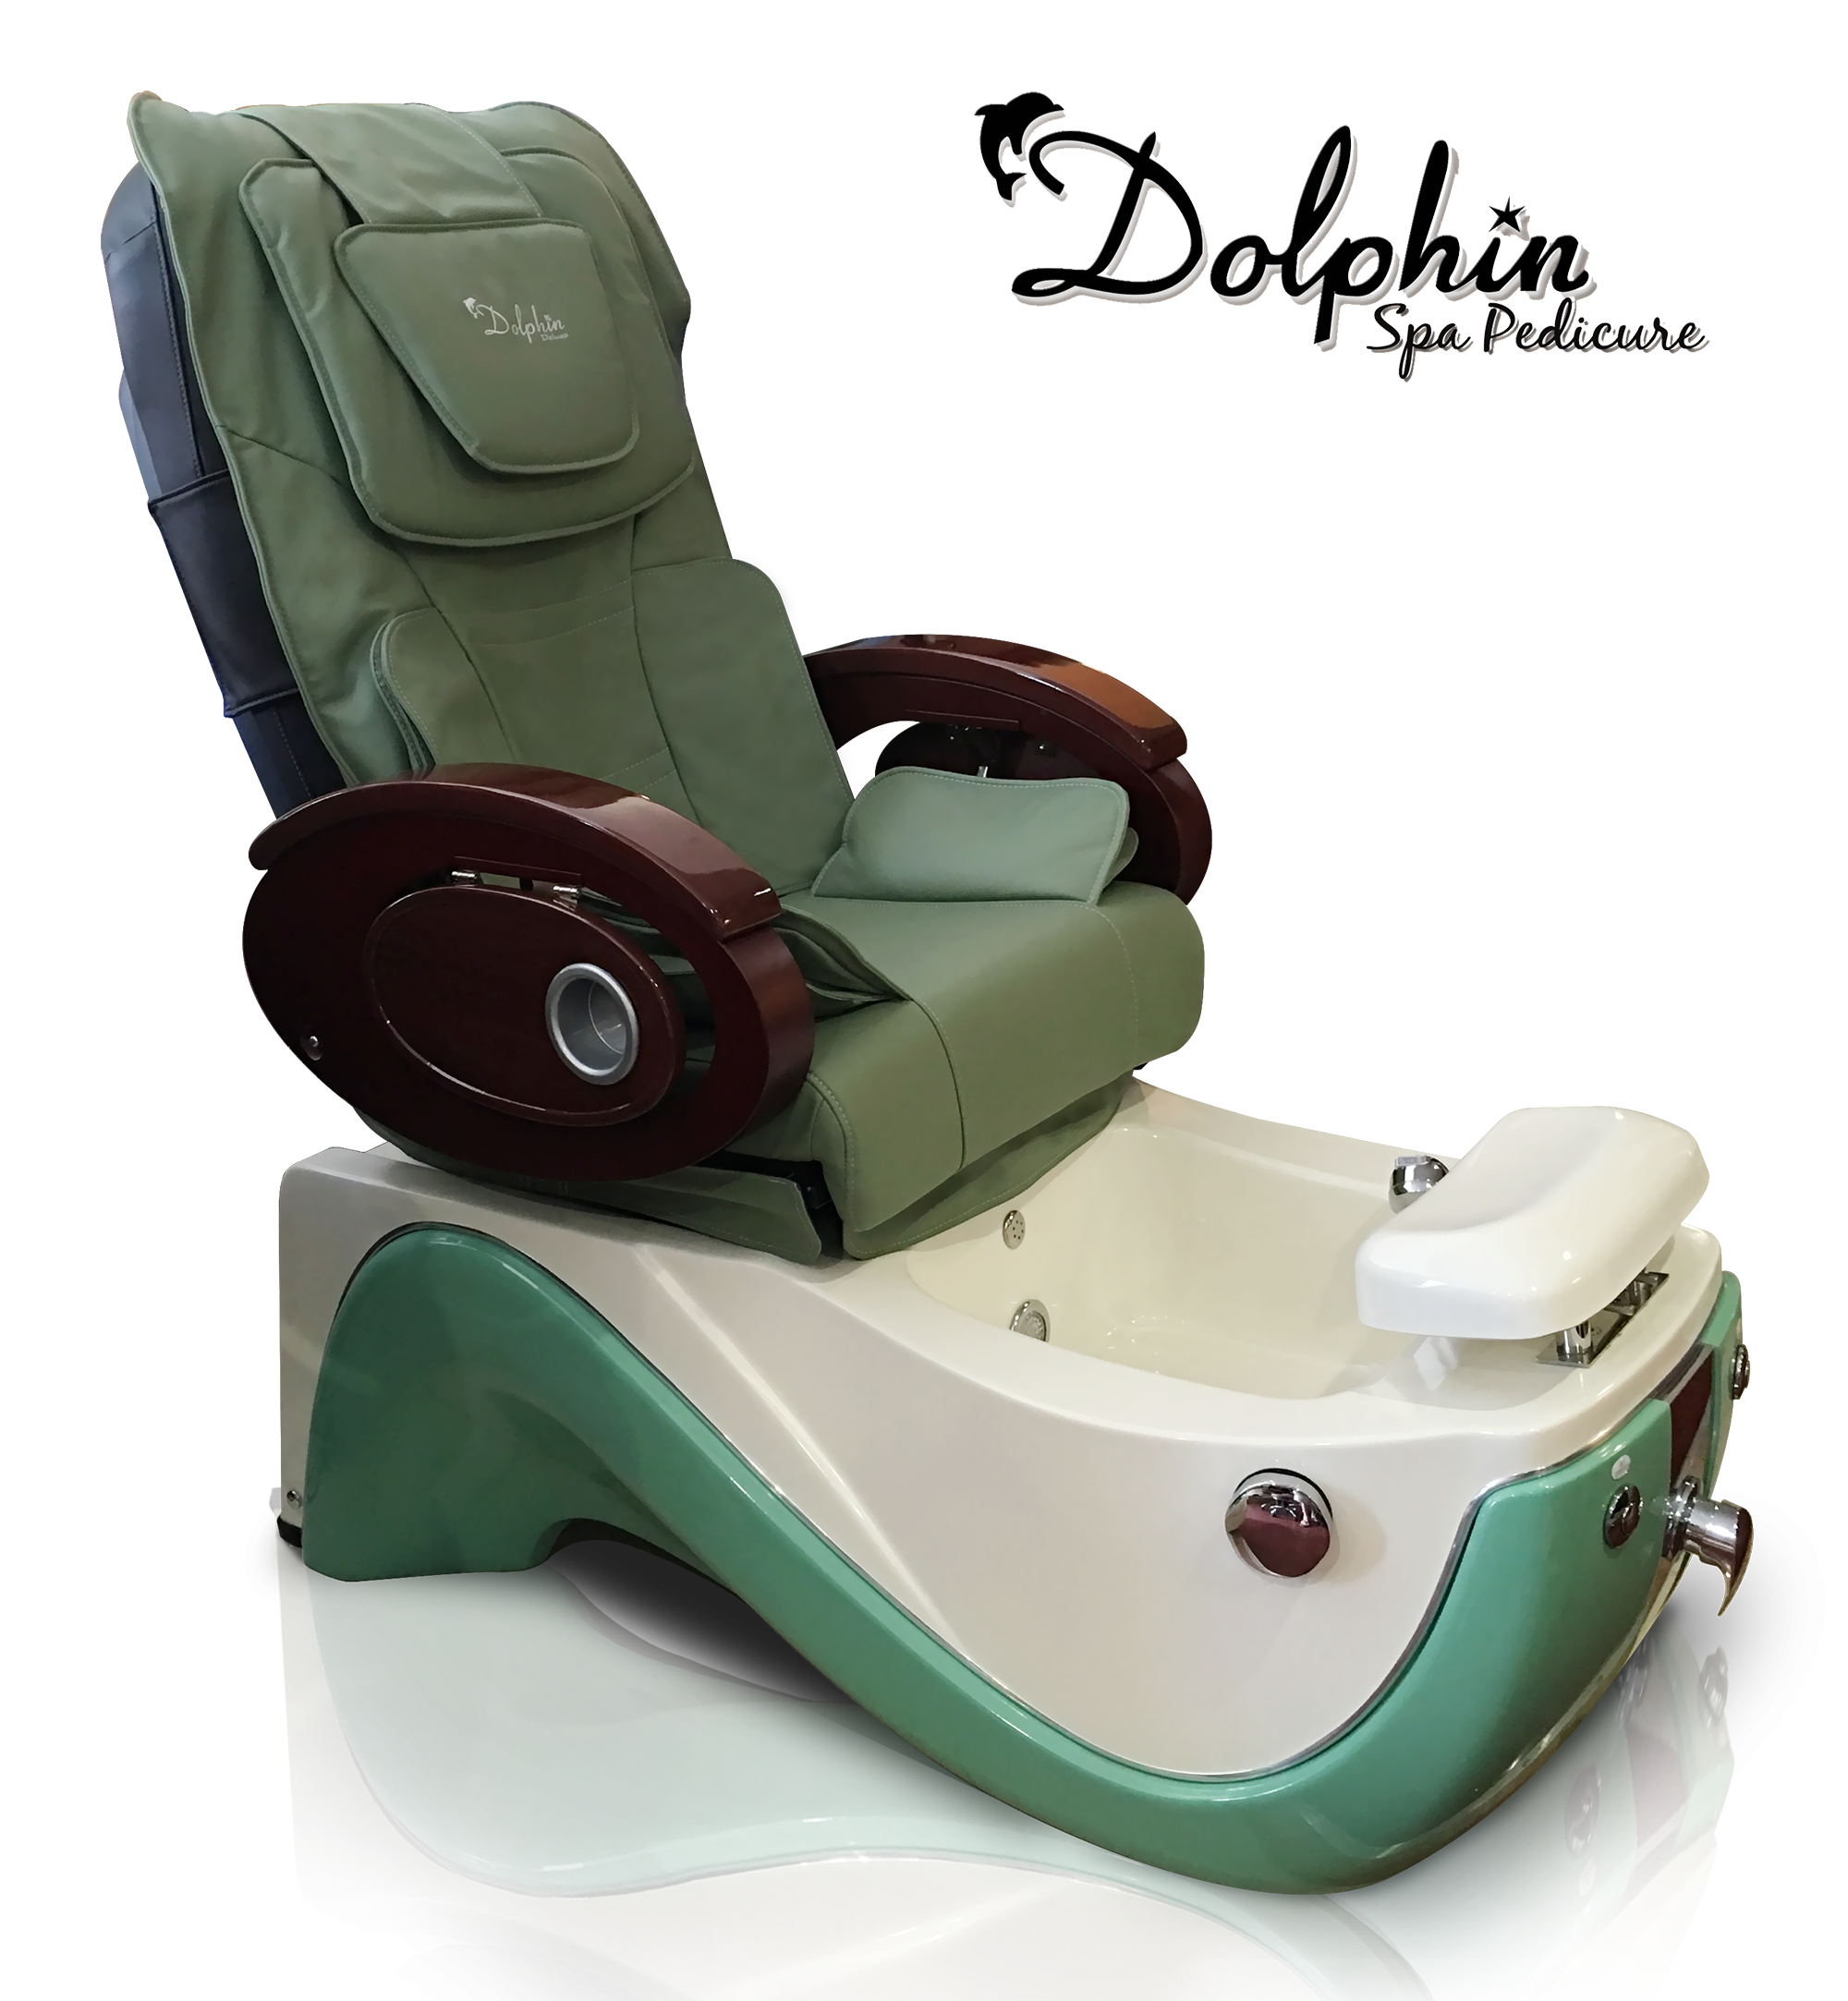 What is a Dolphin massage chair?